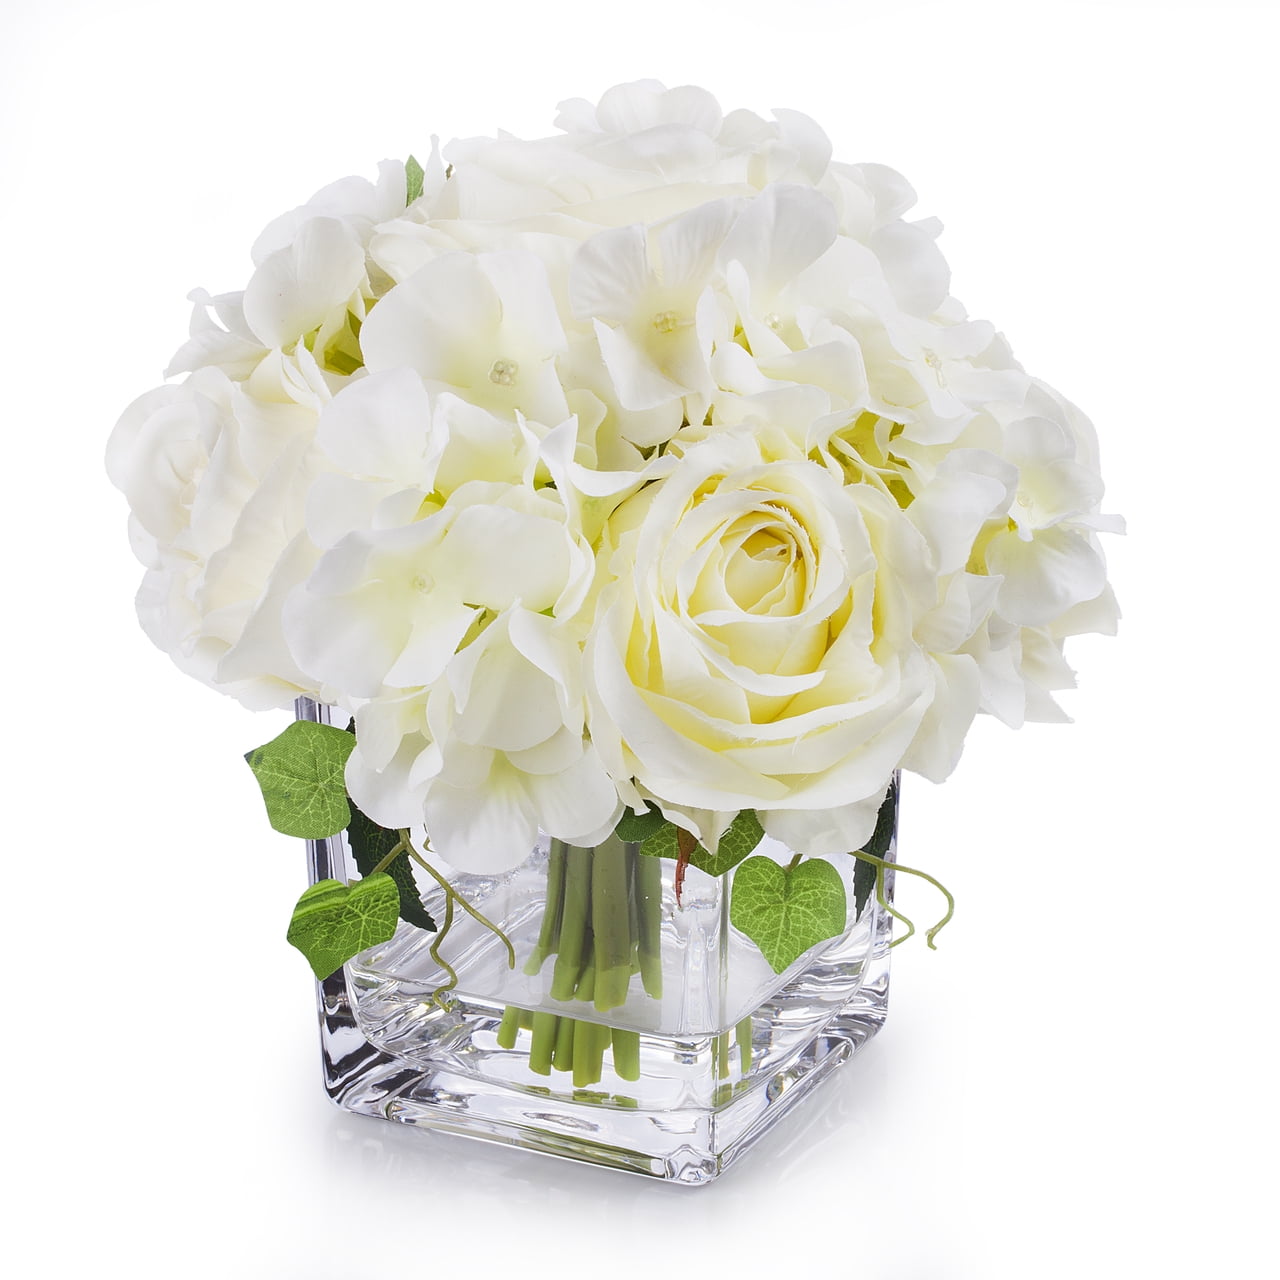 IMIKEYA White Artificial Rose Flower Bouquet Fake Peonies Flower Fake Wildflowers Shrubs Plastic Plants Arrangements Foliage Greenery Branches for Home Garden Vase Decor 